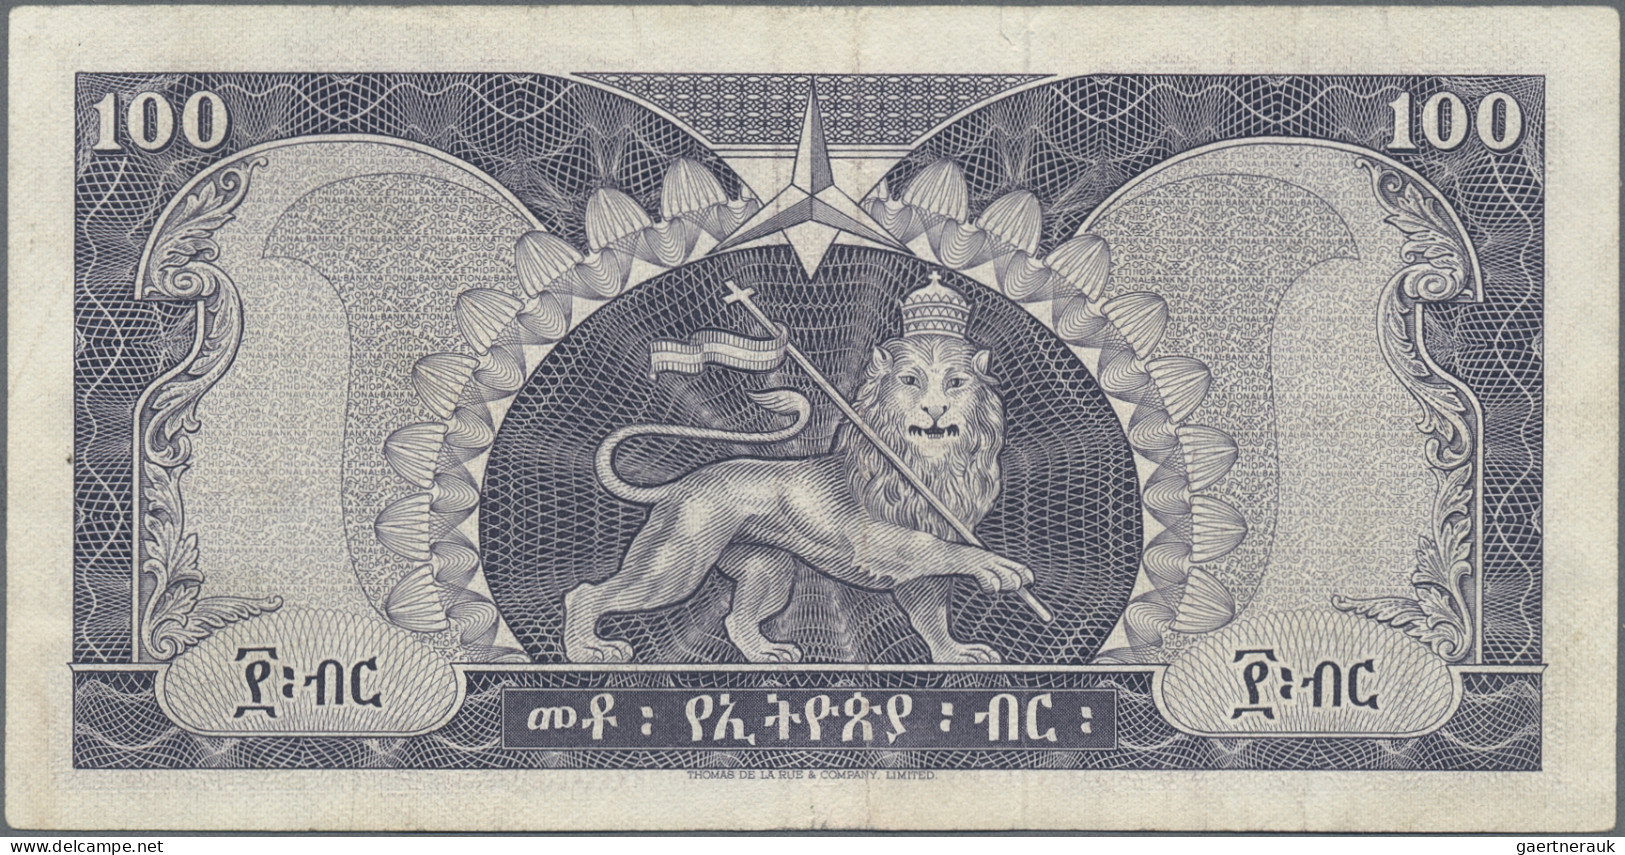 Ethiopia: State Bank of Ethiopia, set with 5 banknotes, series 1961/66, with 100